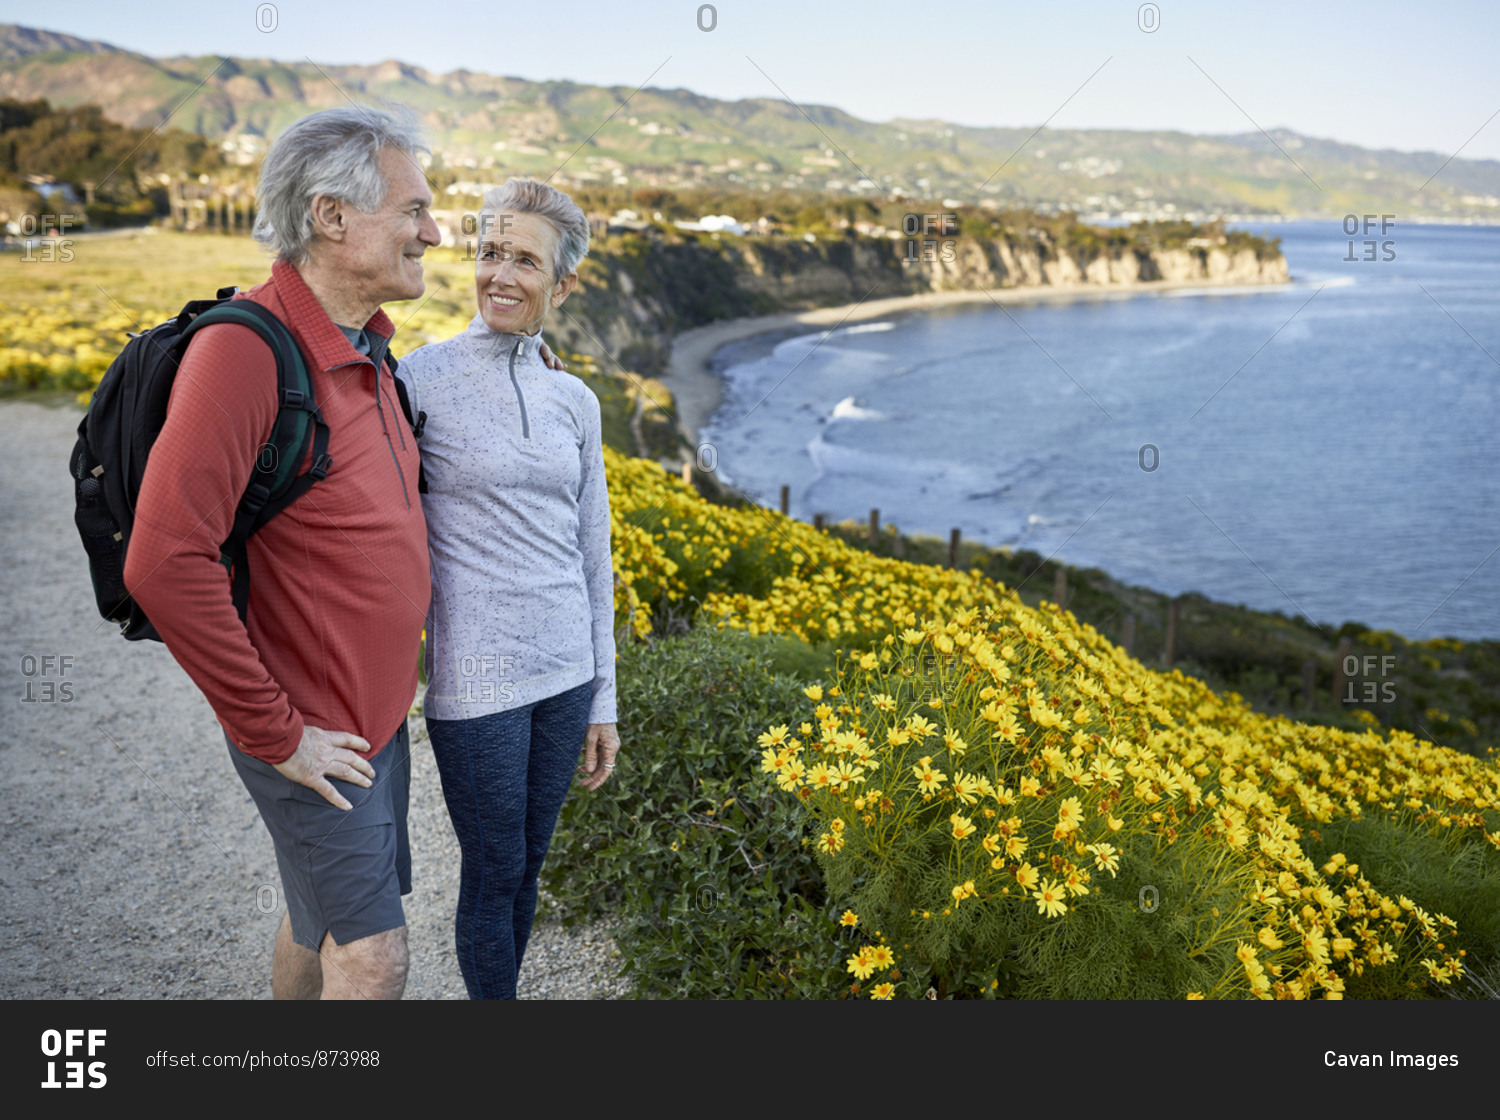 Smiling senior woman looking at man while standing by flowering plants on cliff at beach